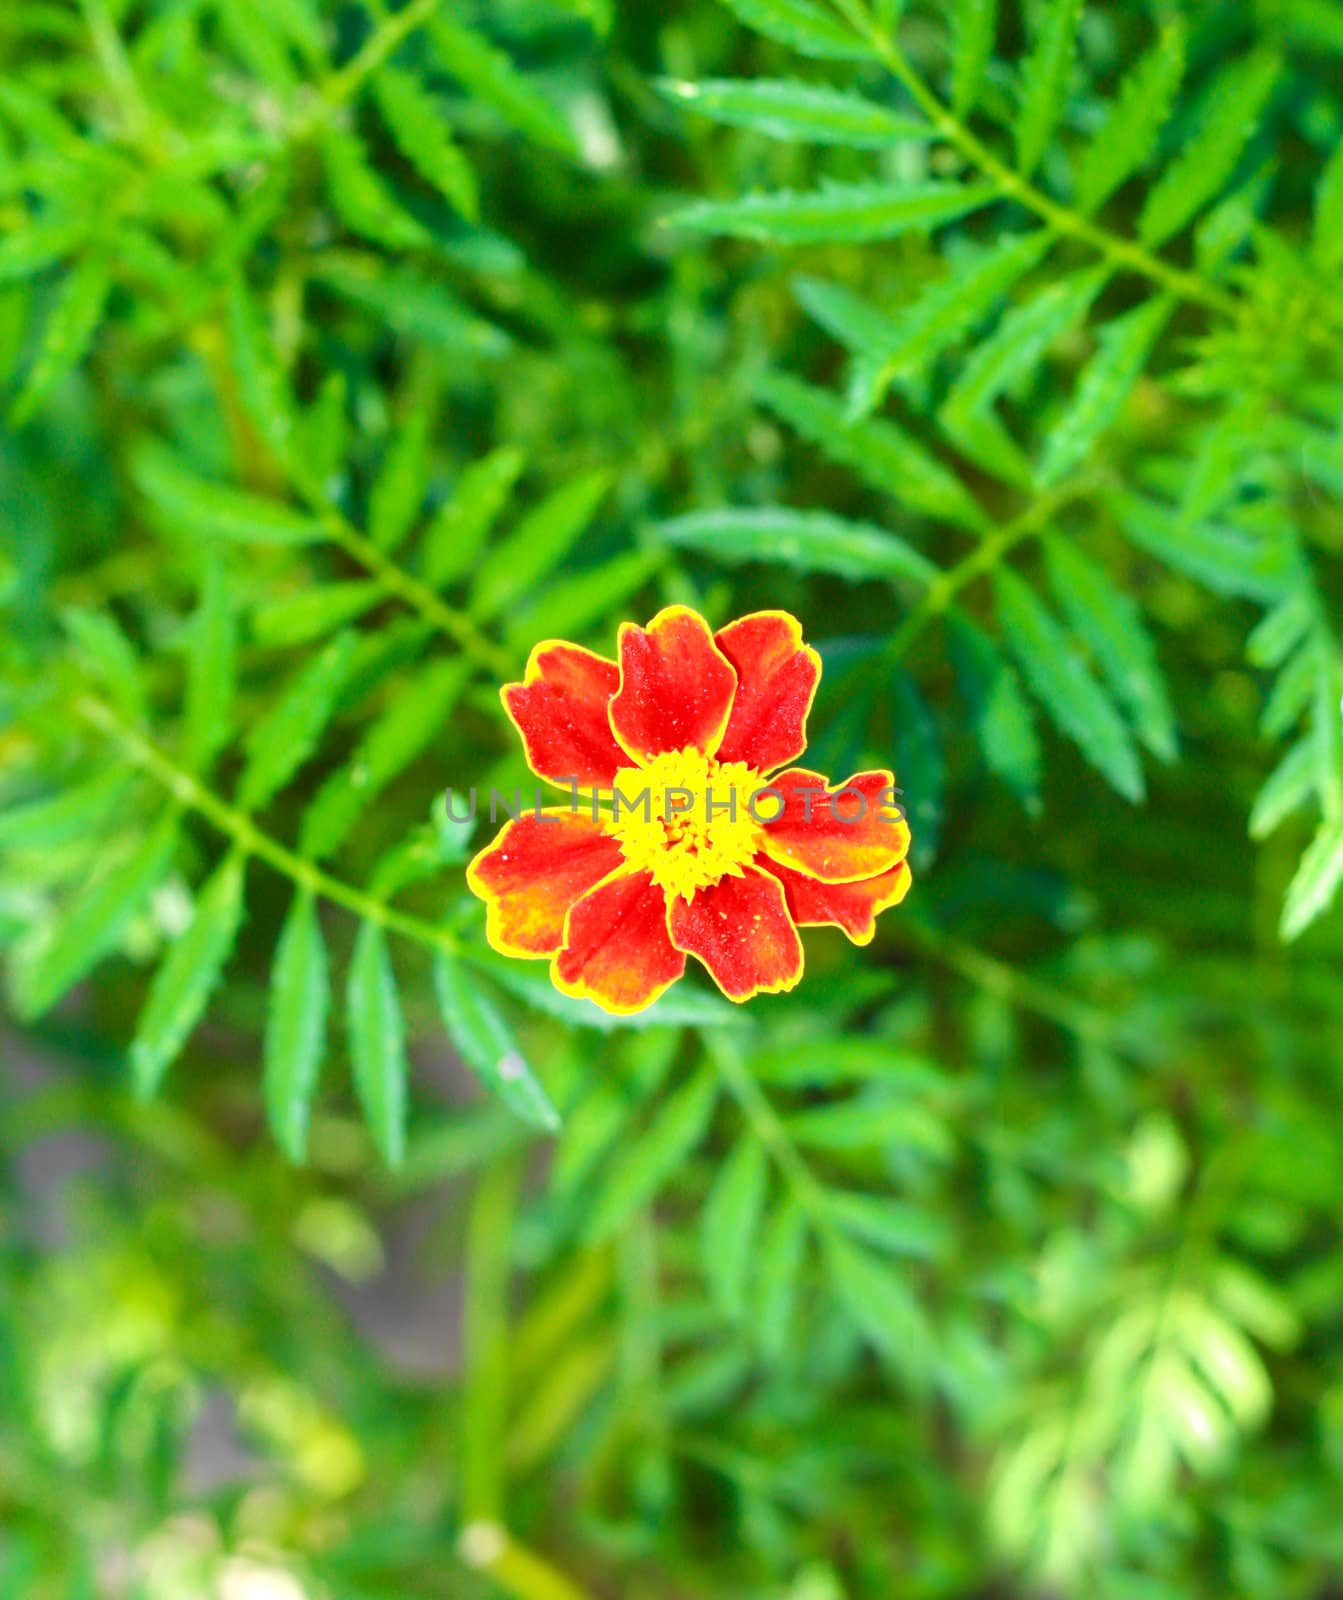 Yellow and red flower in the garden shined at sun  by schankz